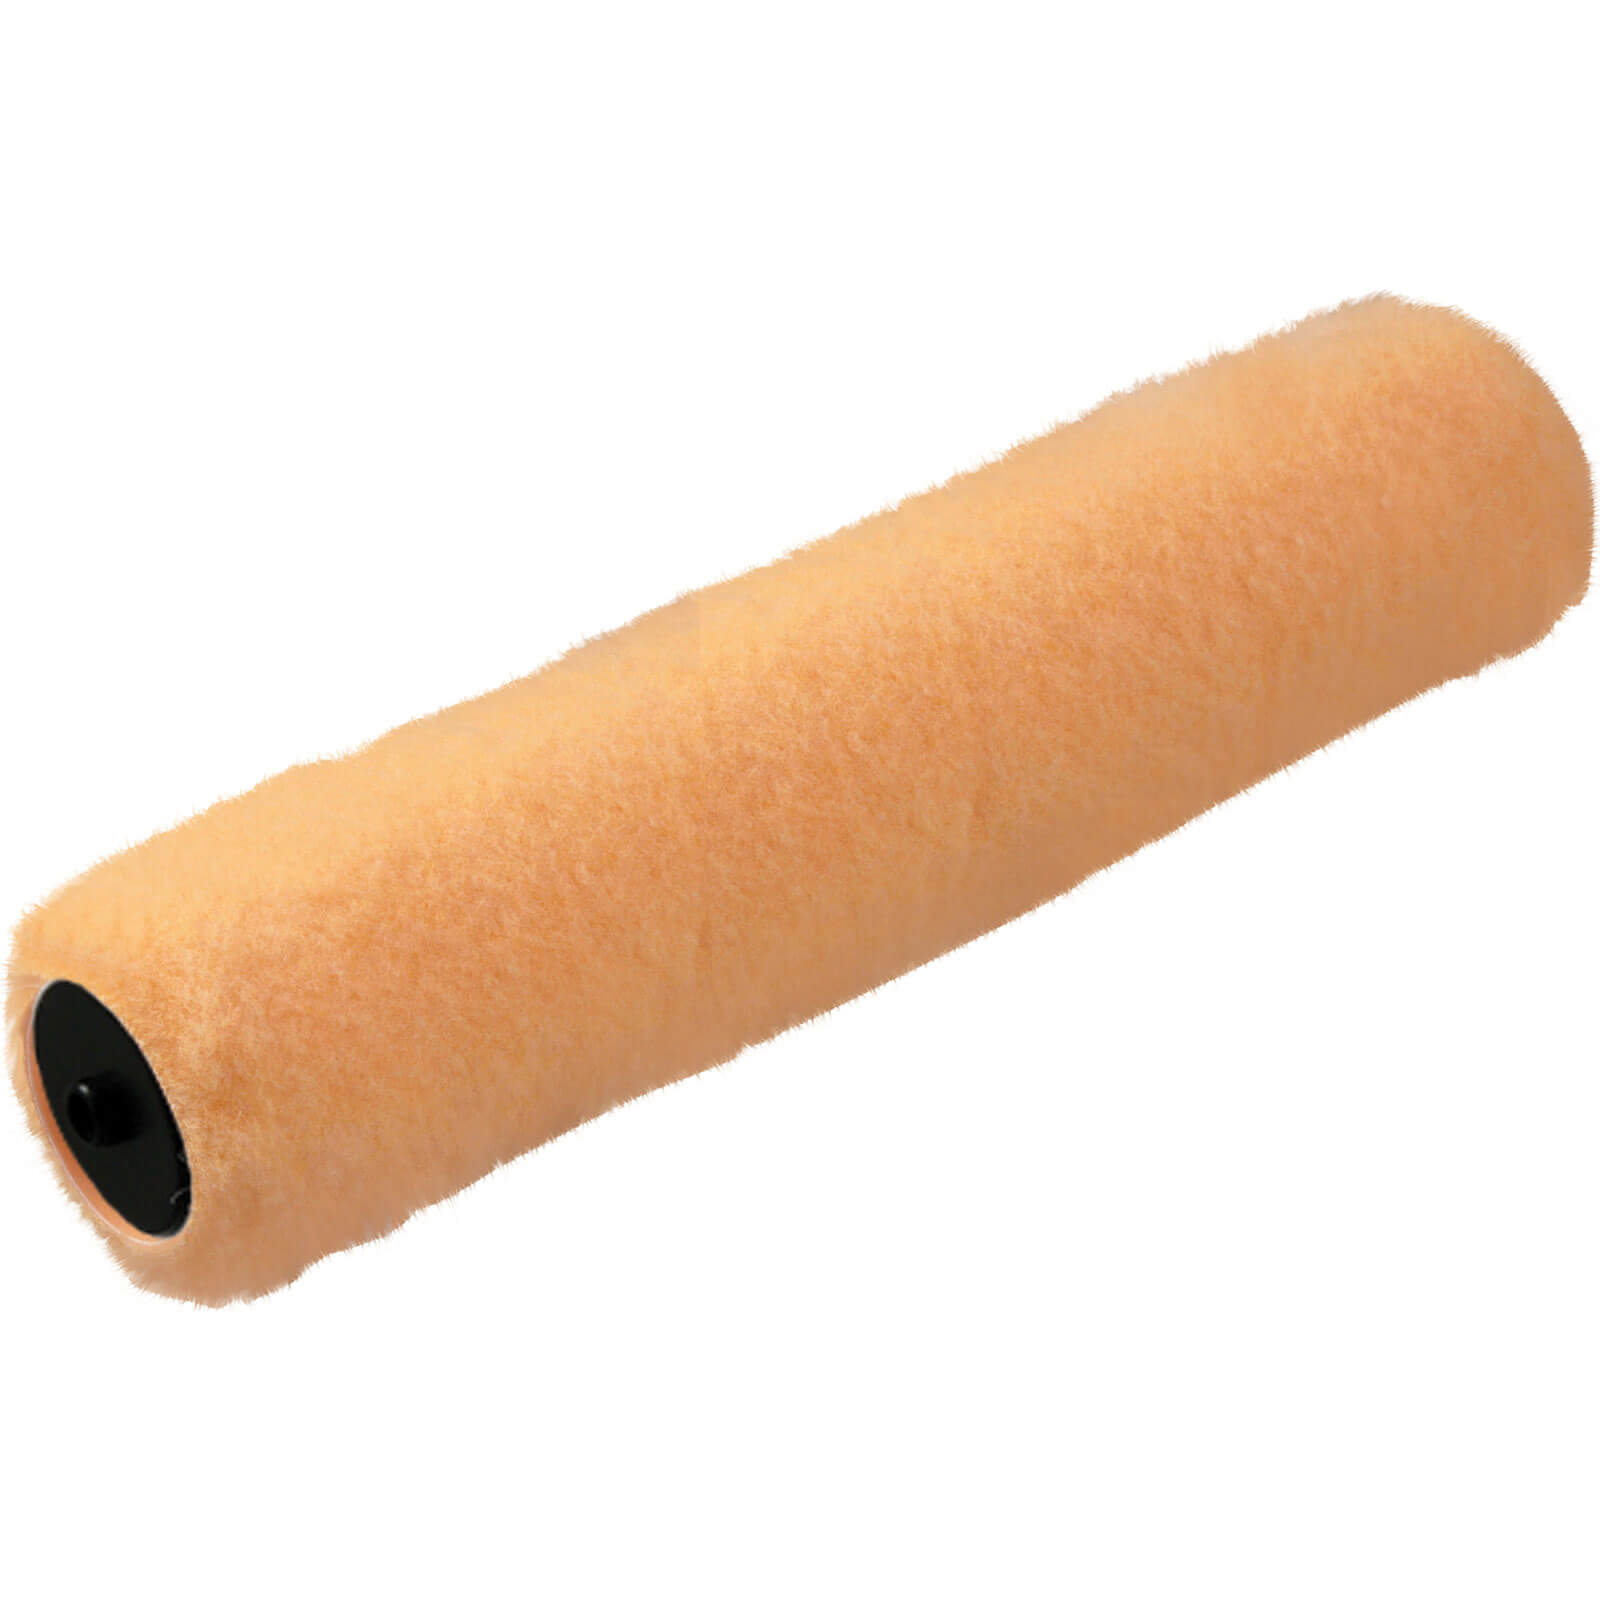 Photos - Putty Knife / Painting Tool Stanley Extra Long Pile Paint Roller Sleeve 44mm 300mm 